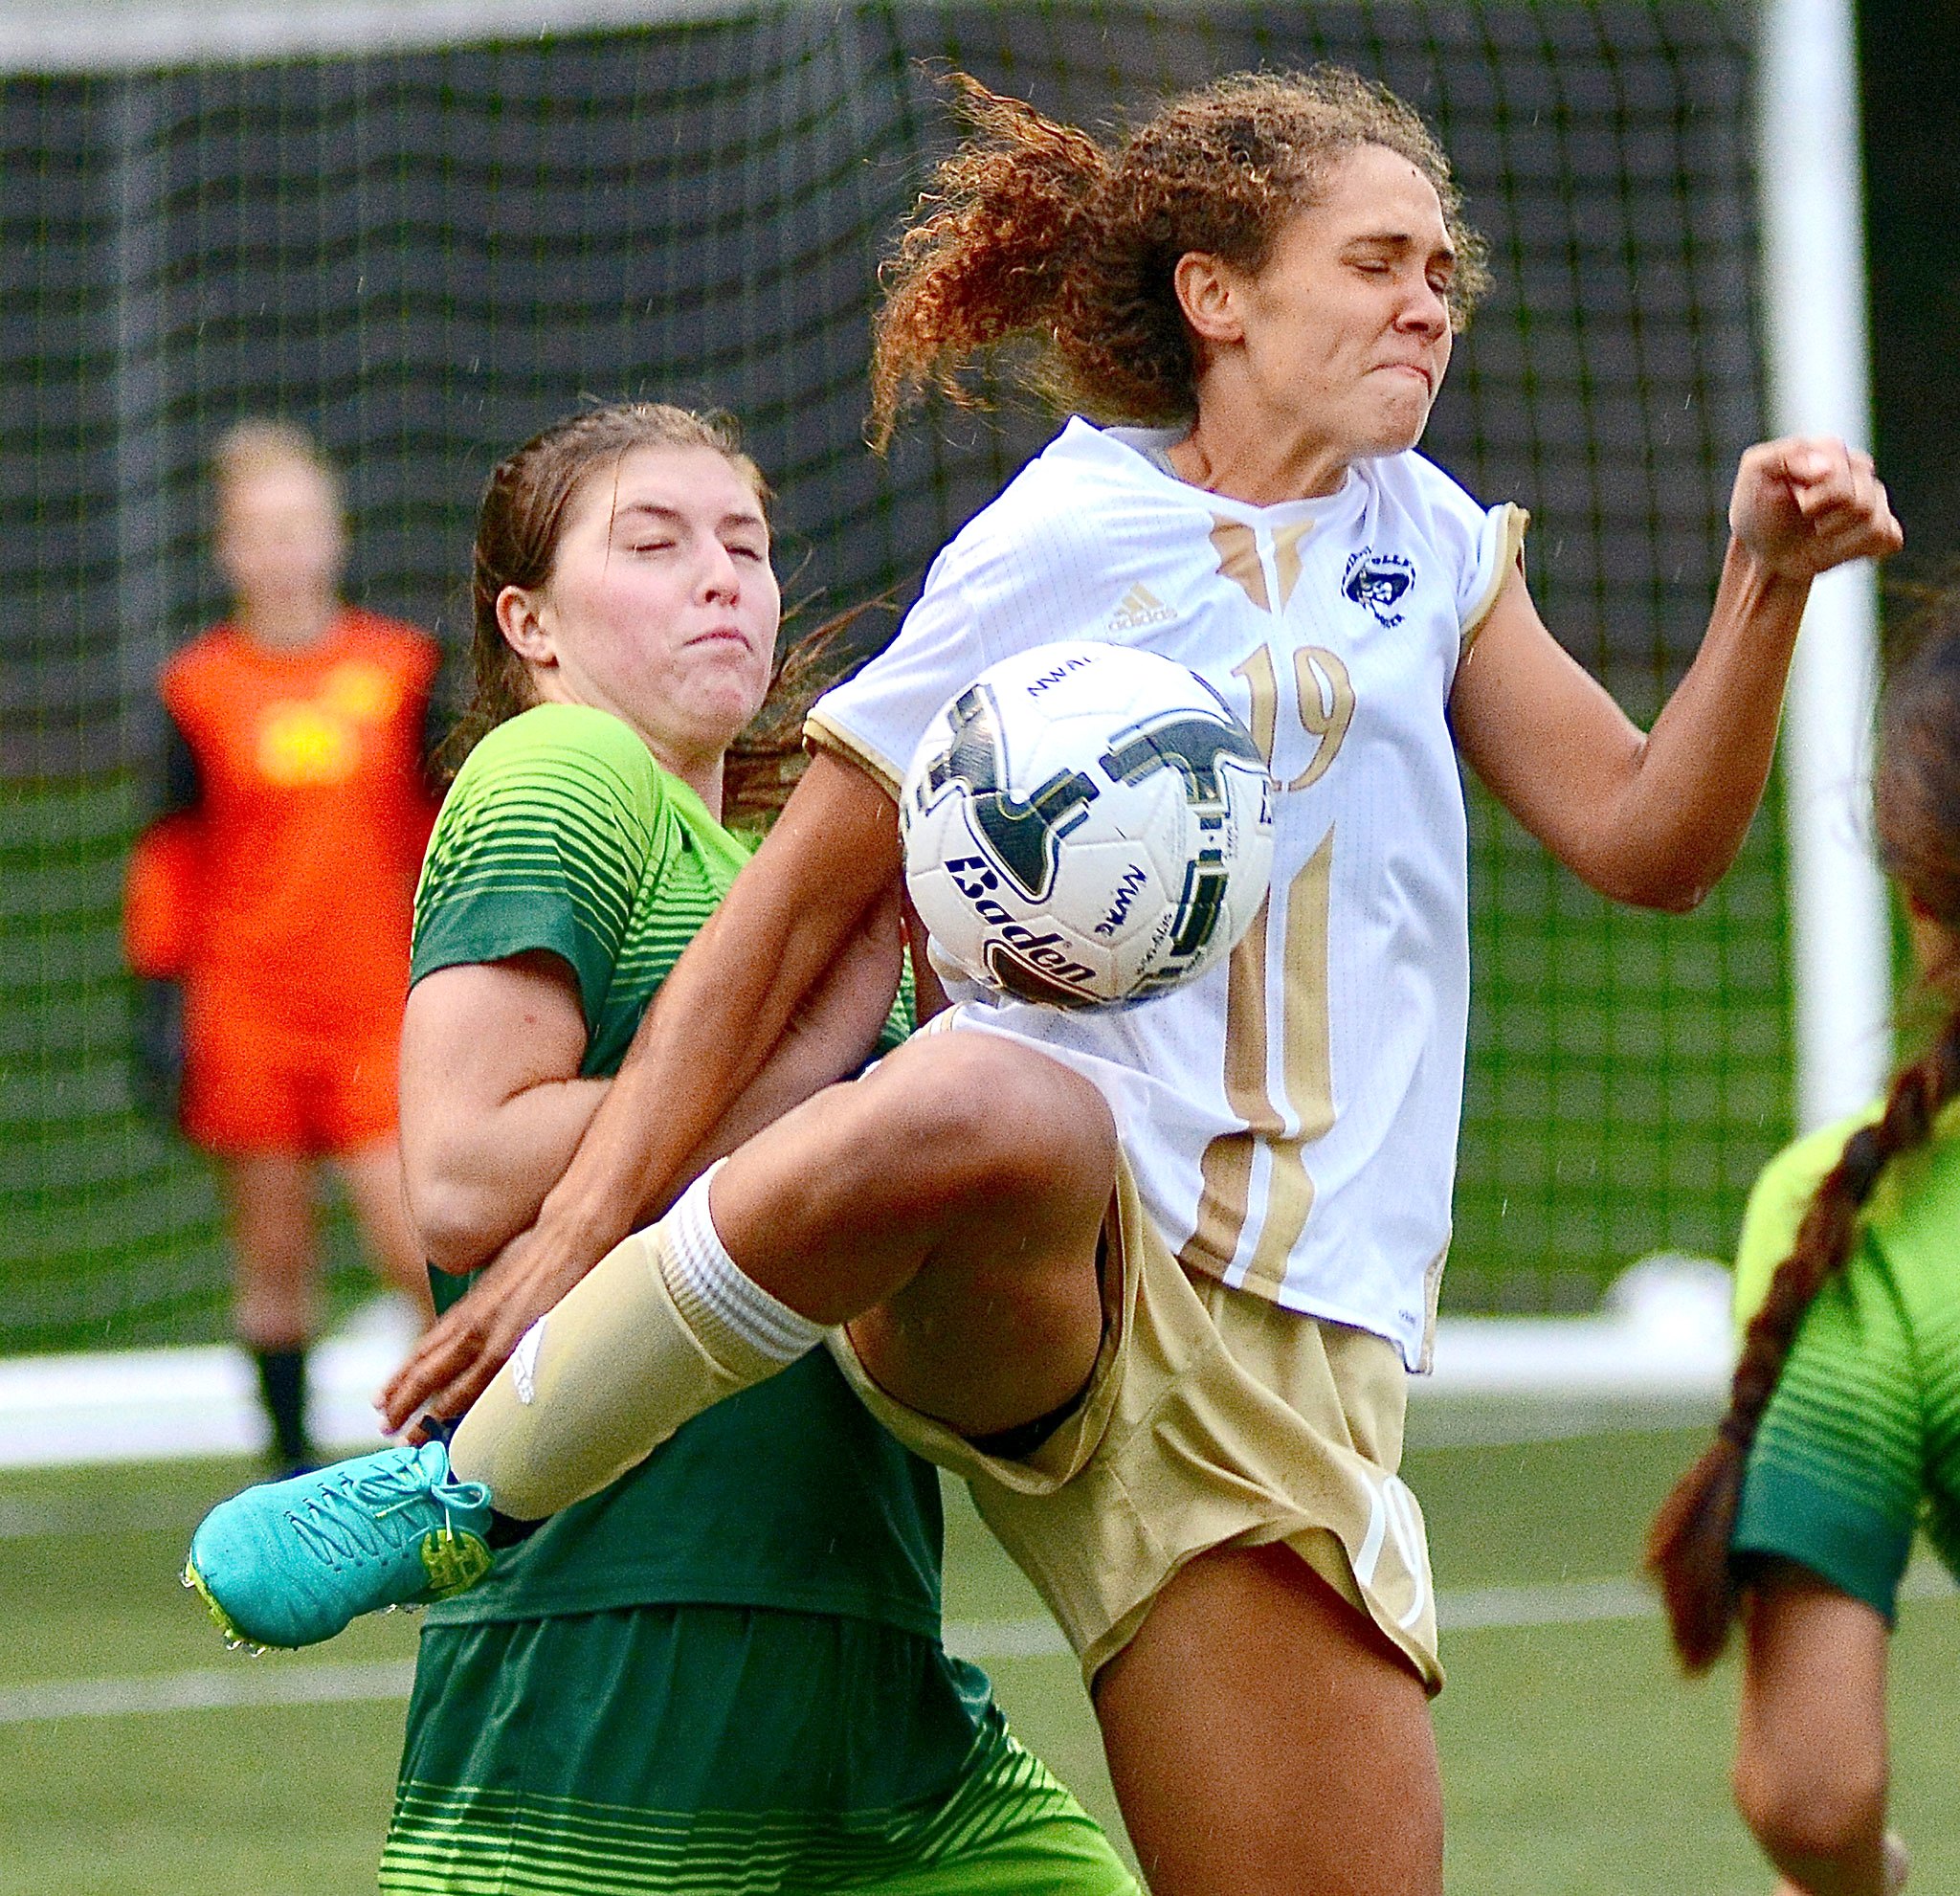 Peninsula College’s Bri Valiente controls a ball against Highline Sunday. Valiente scored the winning goal in the second overtime to give the Pirate women a 1-0 win and NWAC championship.